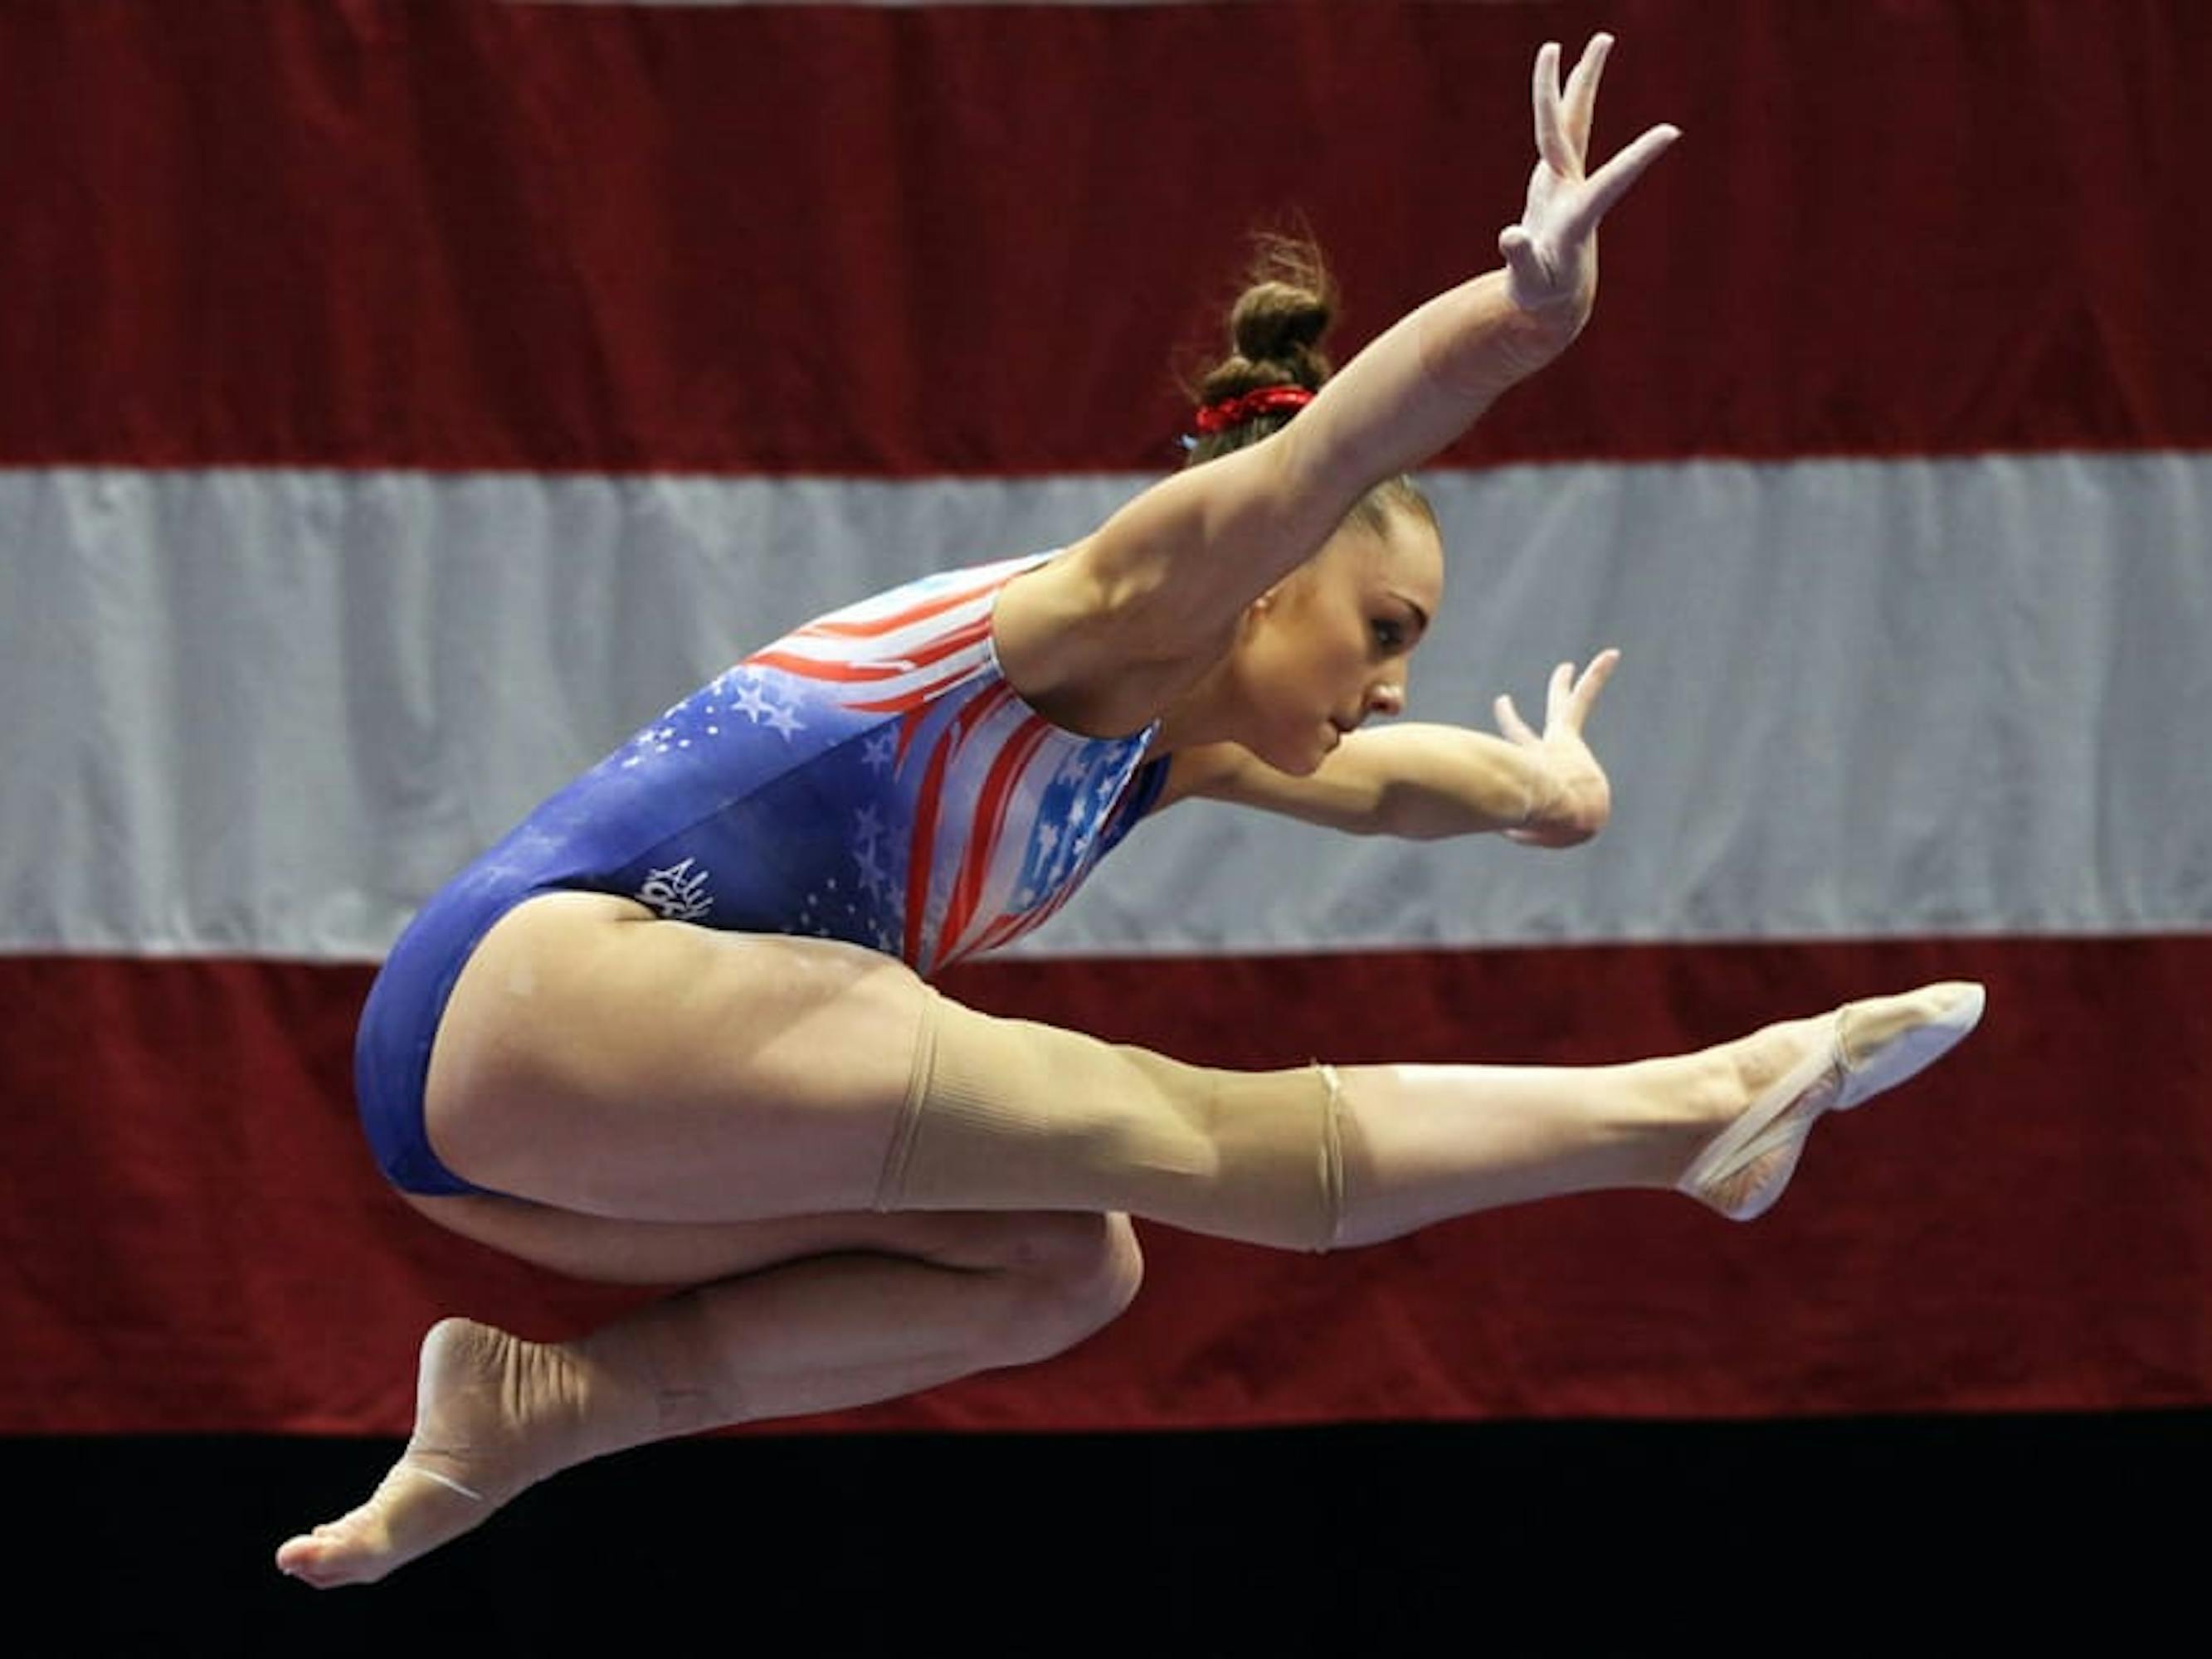 Nichols flies in front of an American flag.